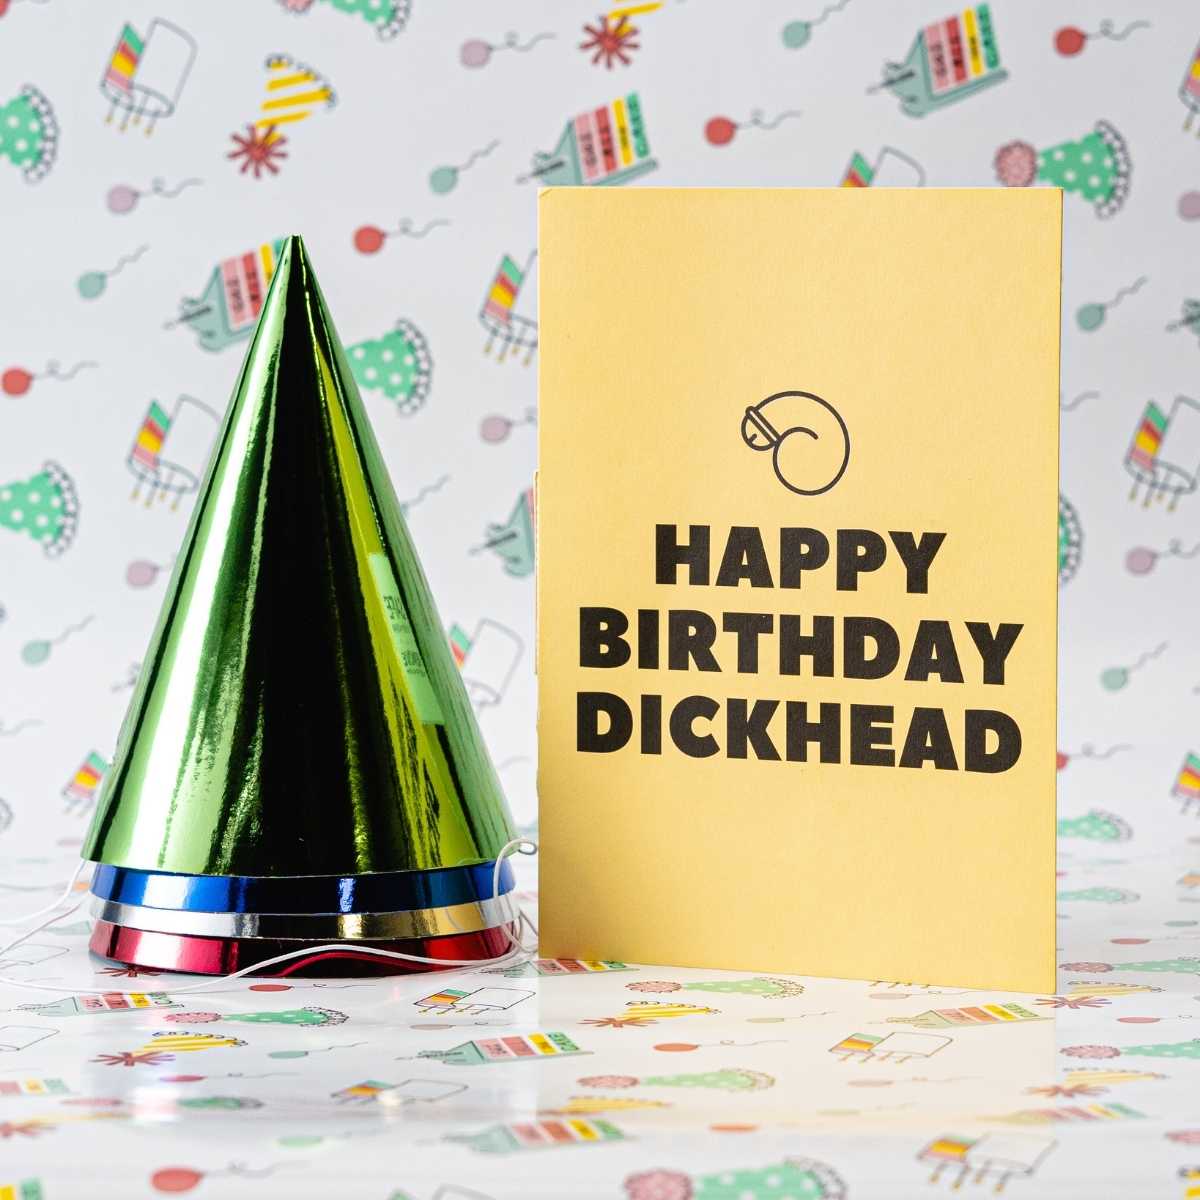 Happy Birthday D*ckhead! - Singing Birthday Greeting Card for Him Pranks Anonymous send hilarious pranks and gag gifts to your friends or family.